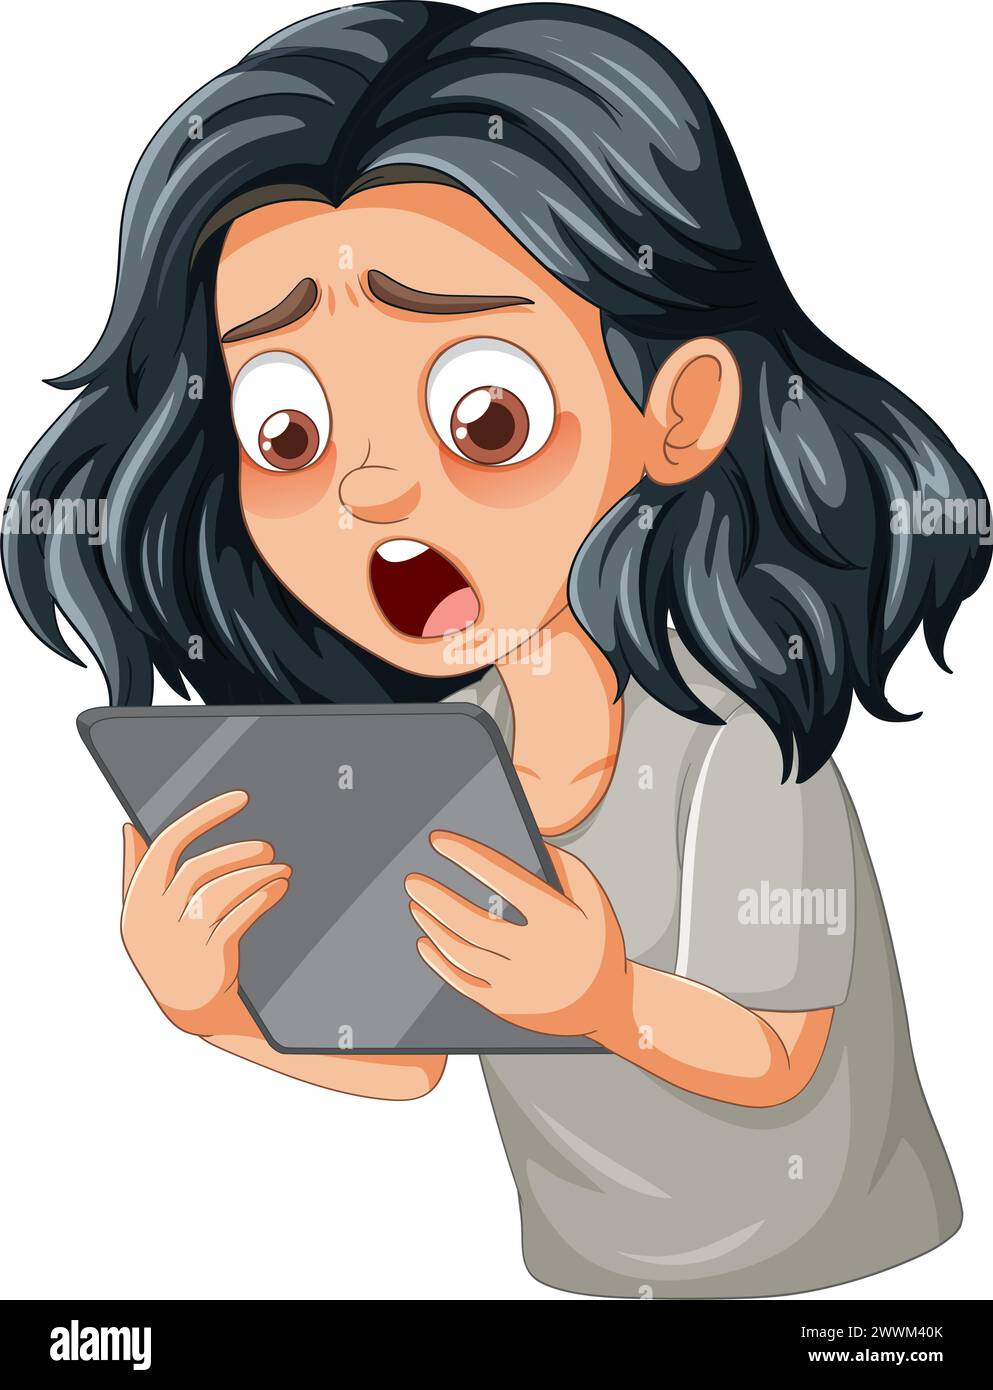 Cartoon of a woman surprised by tablet content Stock Vector